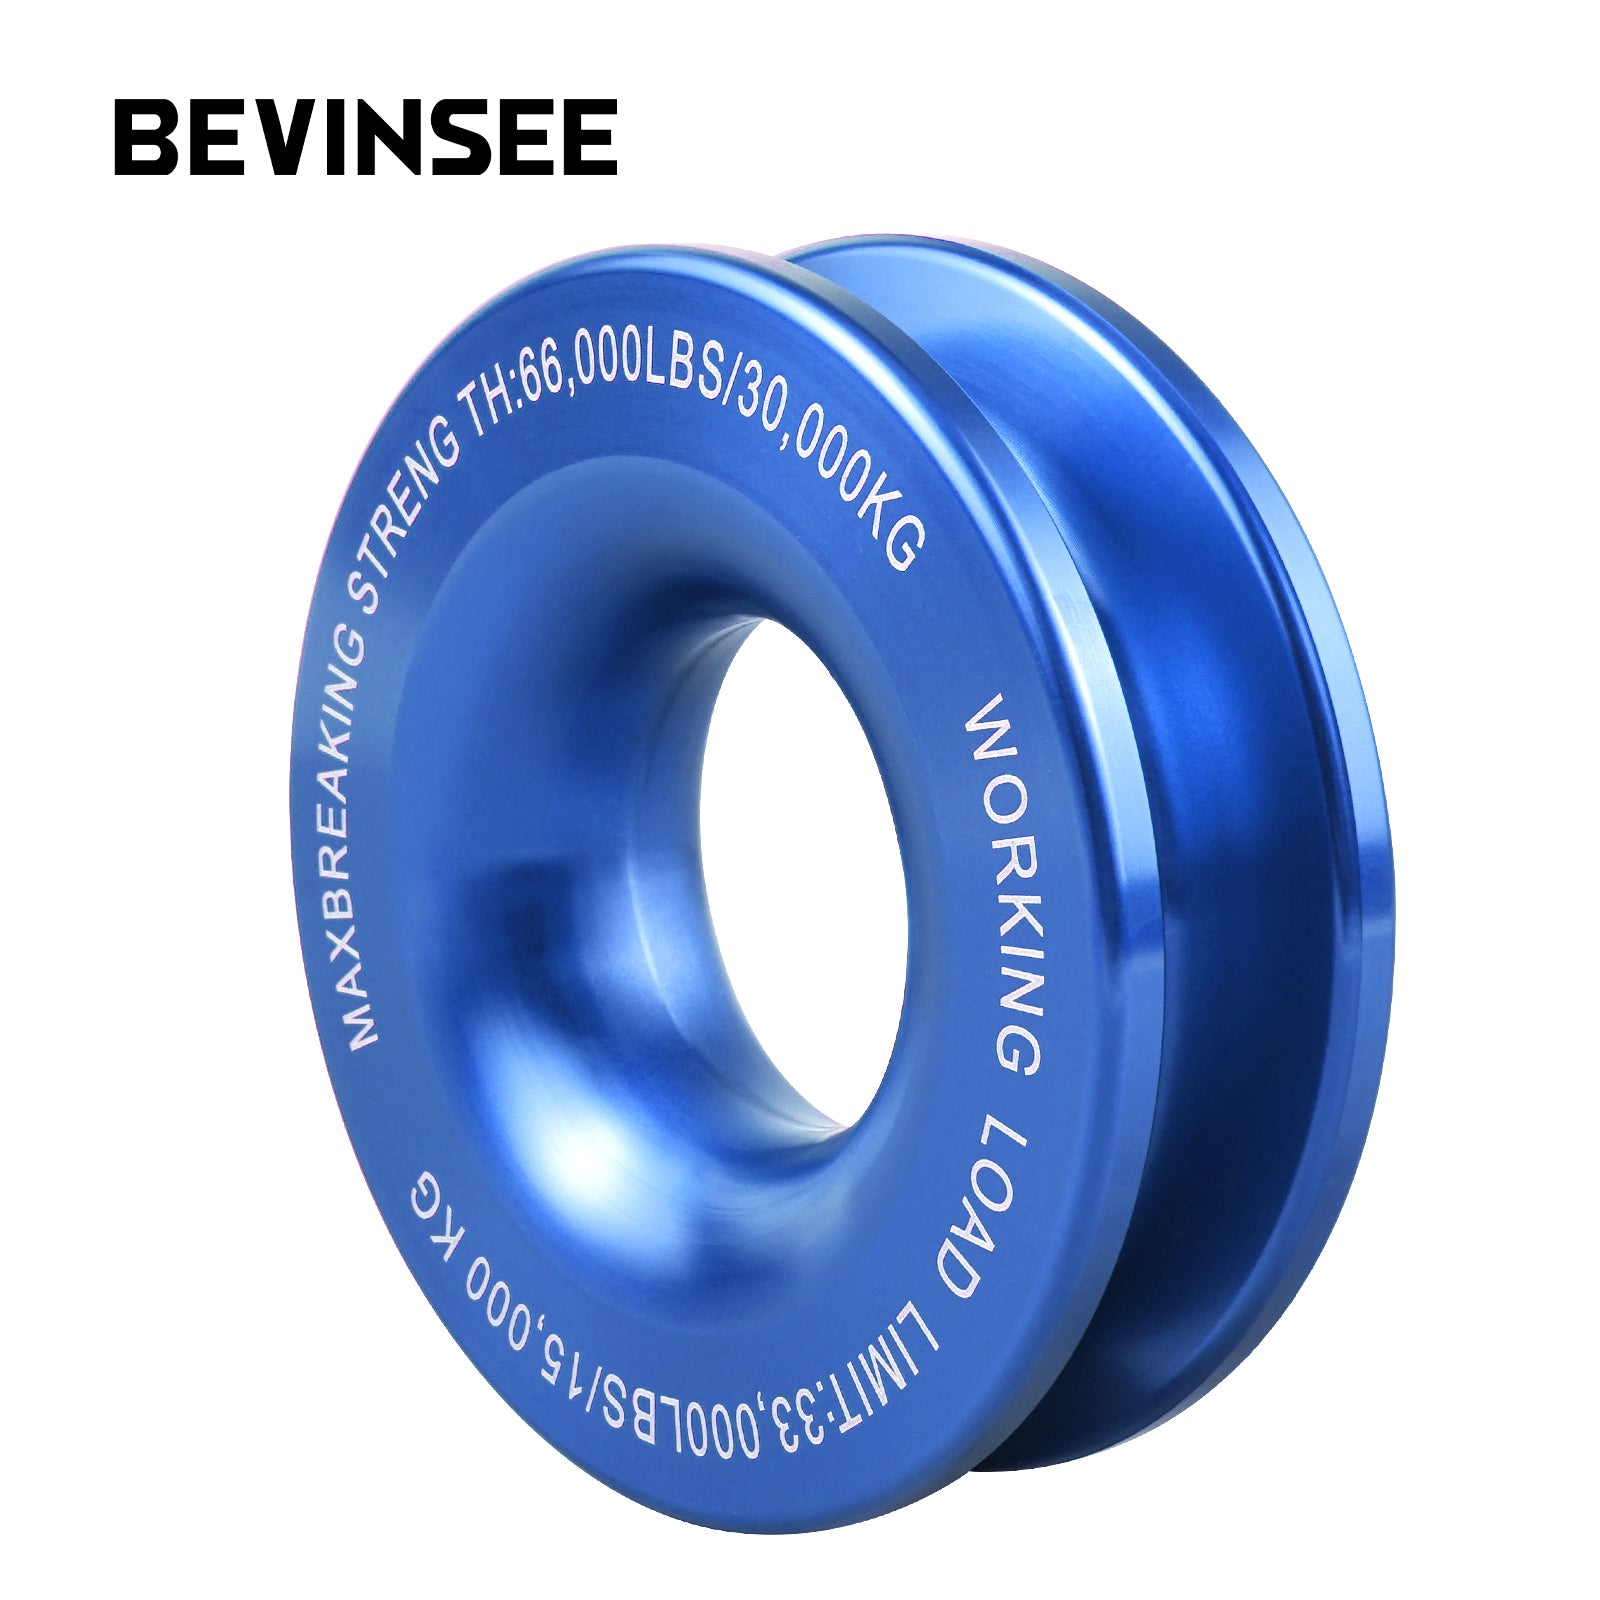 BEVINSEE Recovery Pulley Ring 30000 KG for Soft Shackle and Winch Rope 4WD Recovery Gear 4x4 Offroad